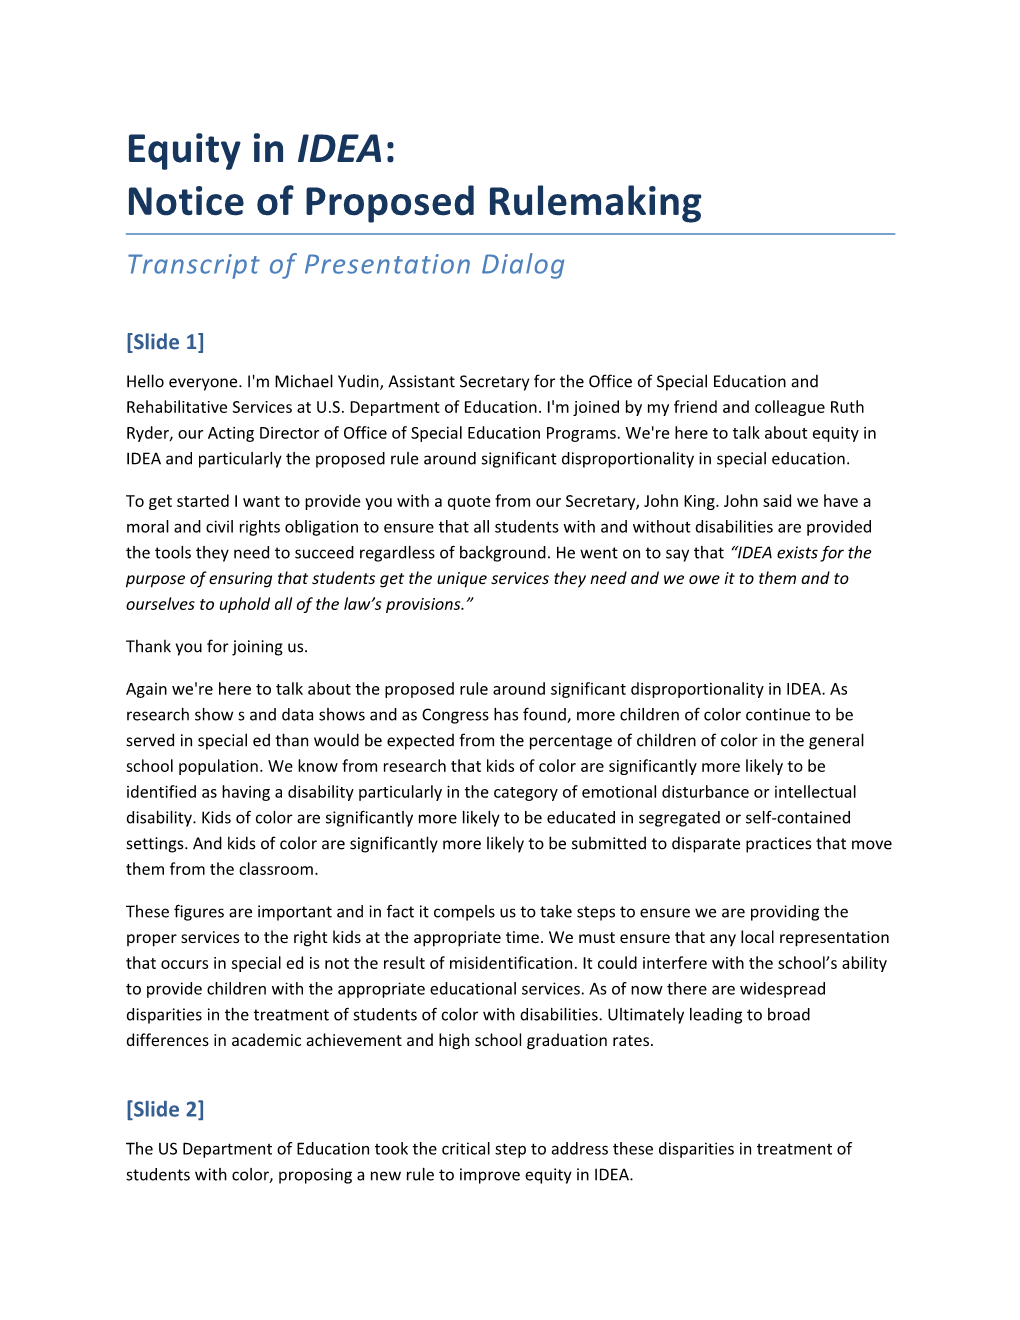 Equity in IDEA: Notice of Proposed Rulemaking. Transcript of Presentation Dialog. (MS Word)